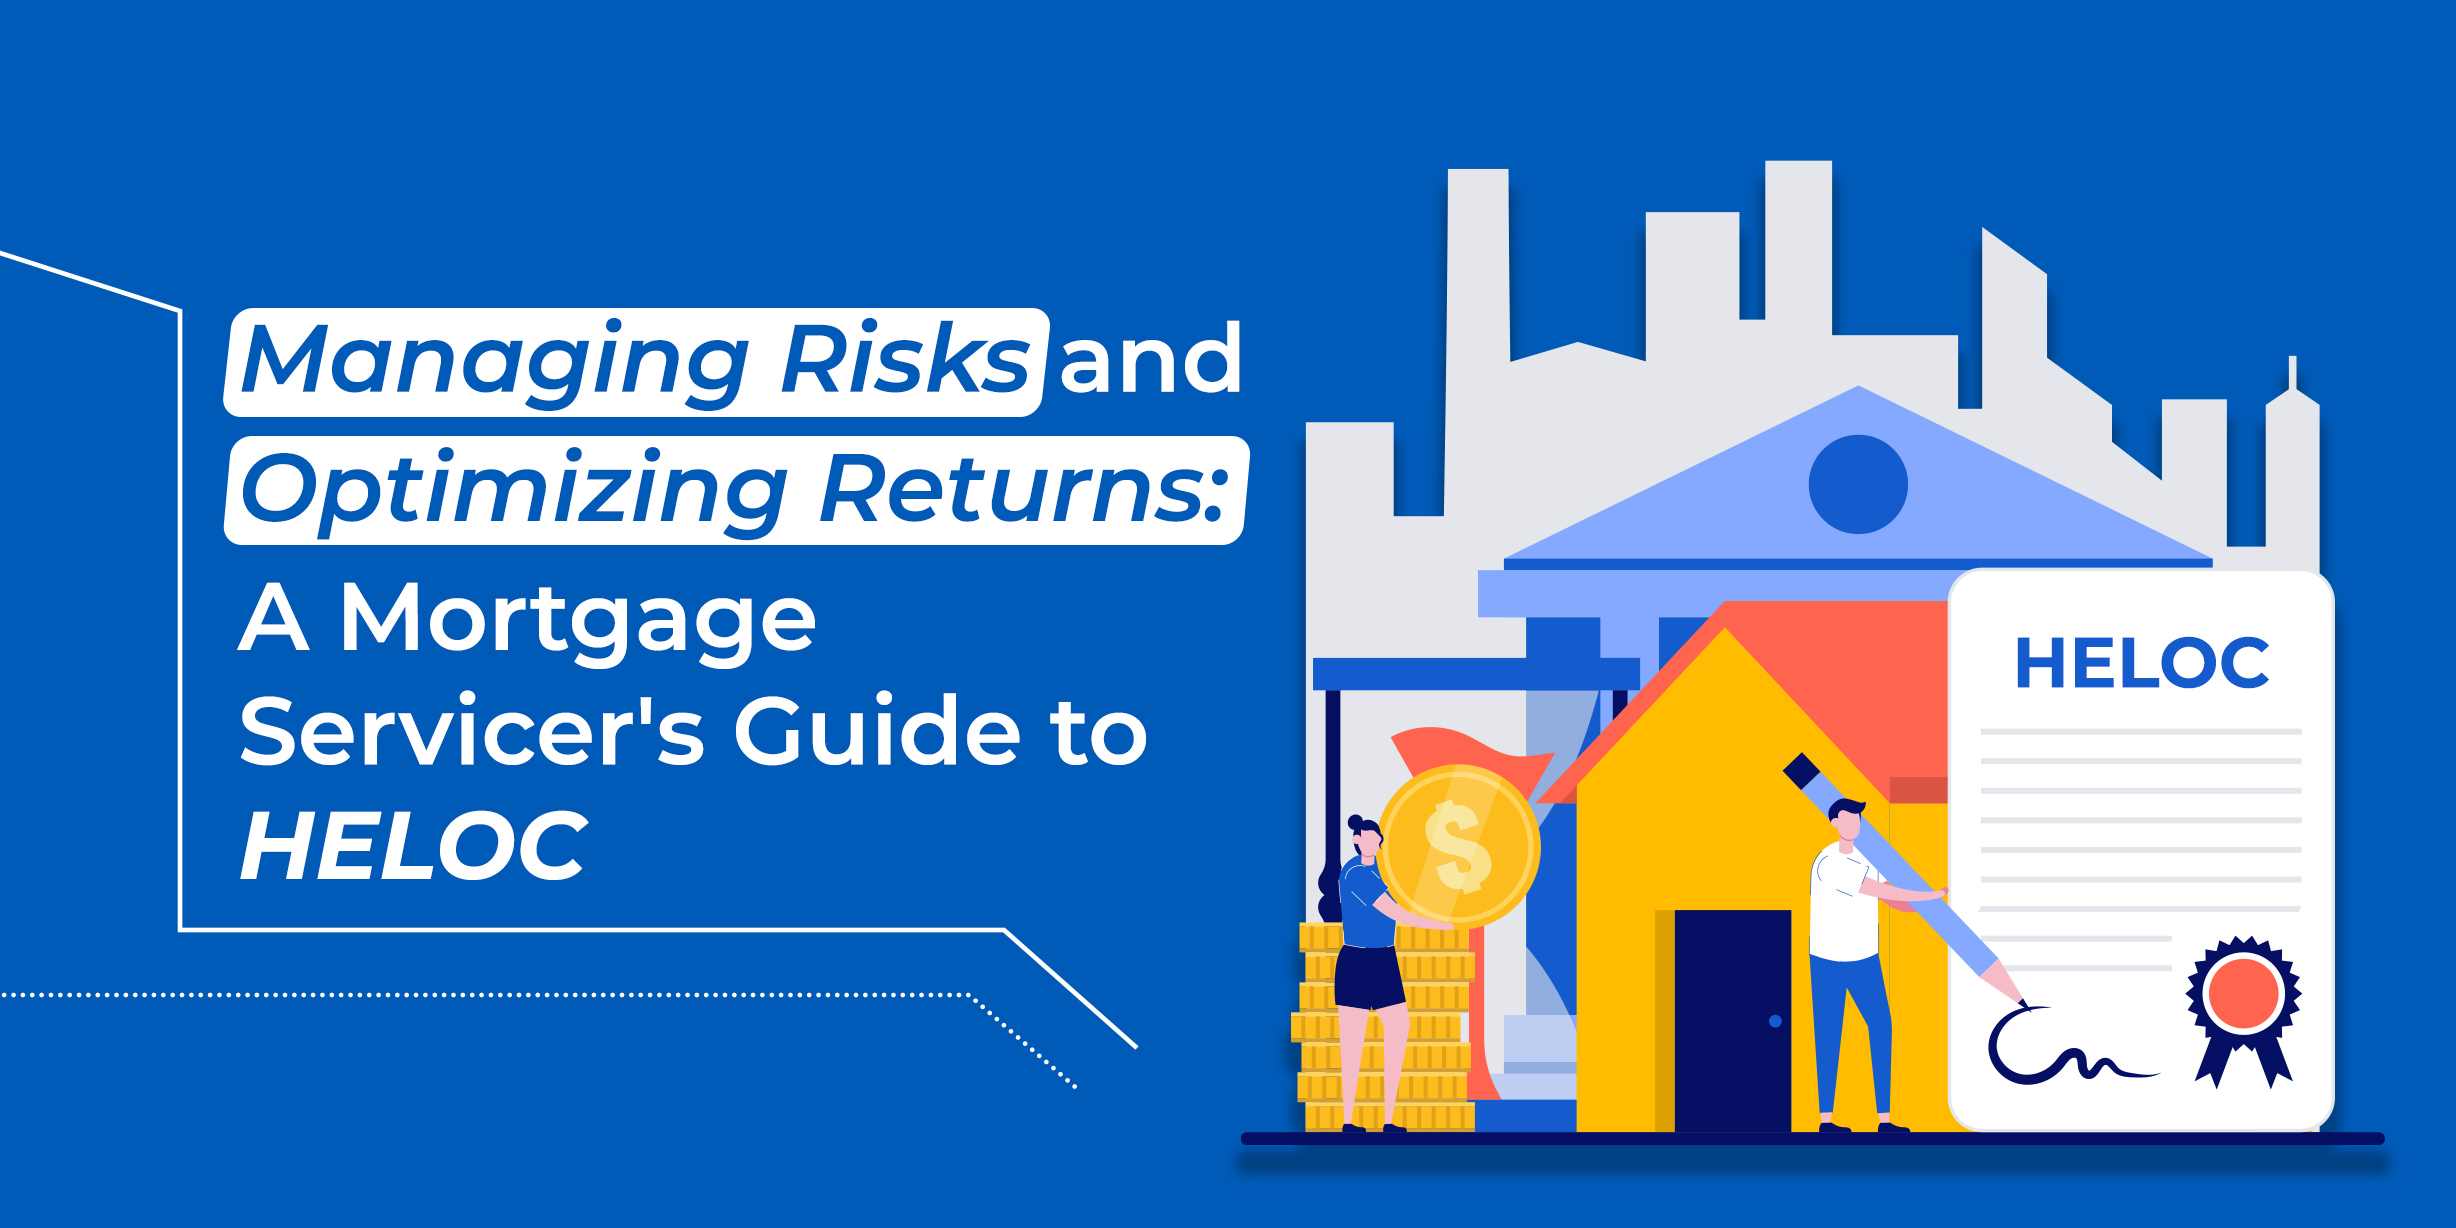 Managing Risks and Optimizing Returns: A Mortgage Servicer's Guide to HELOC